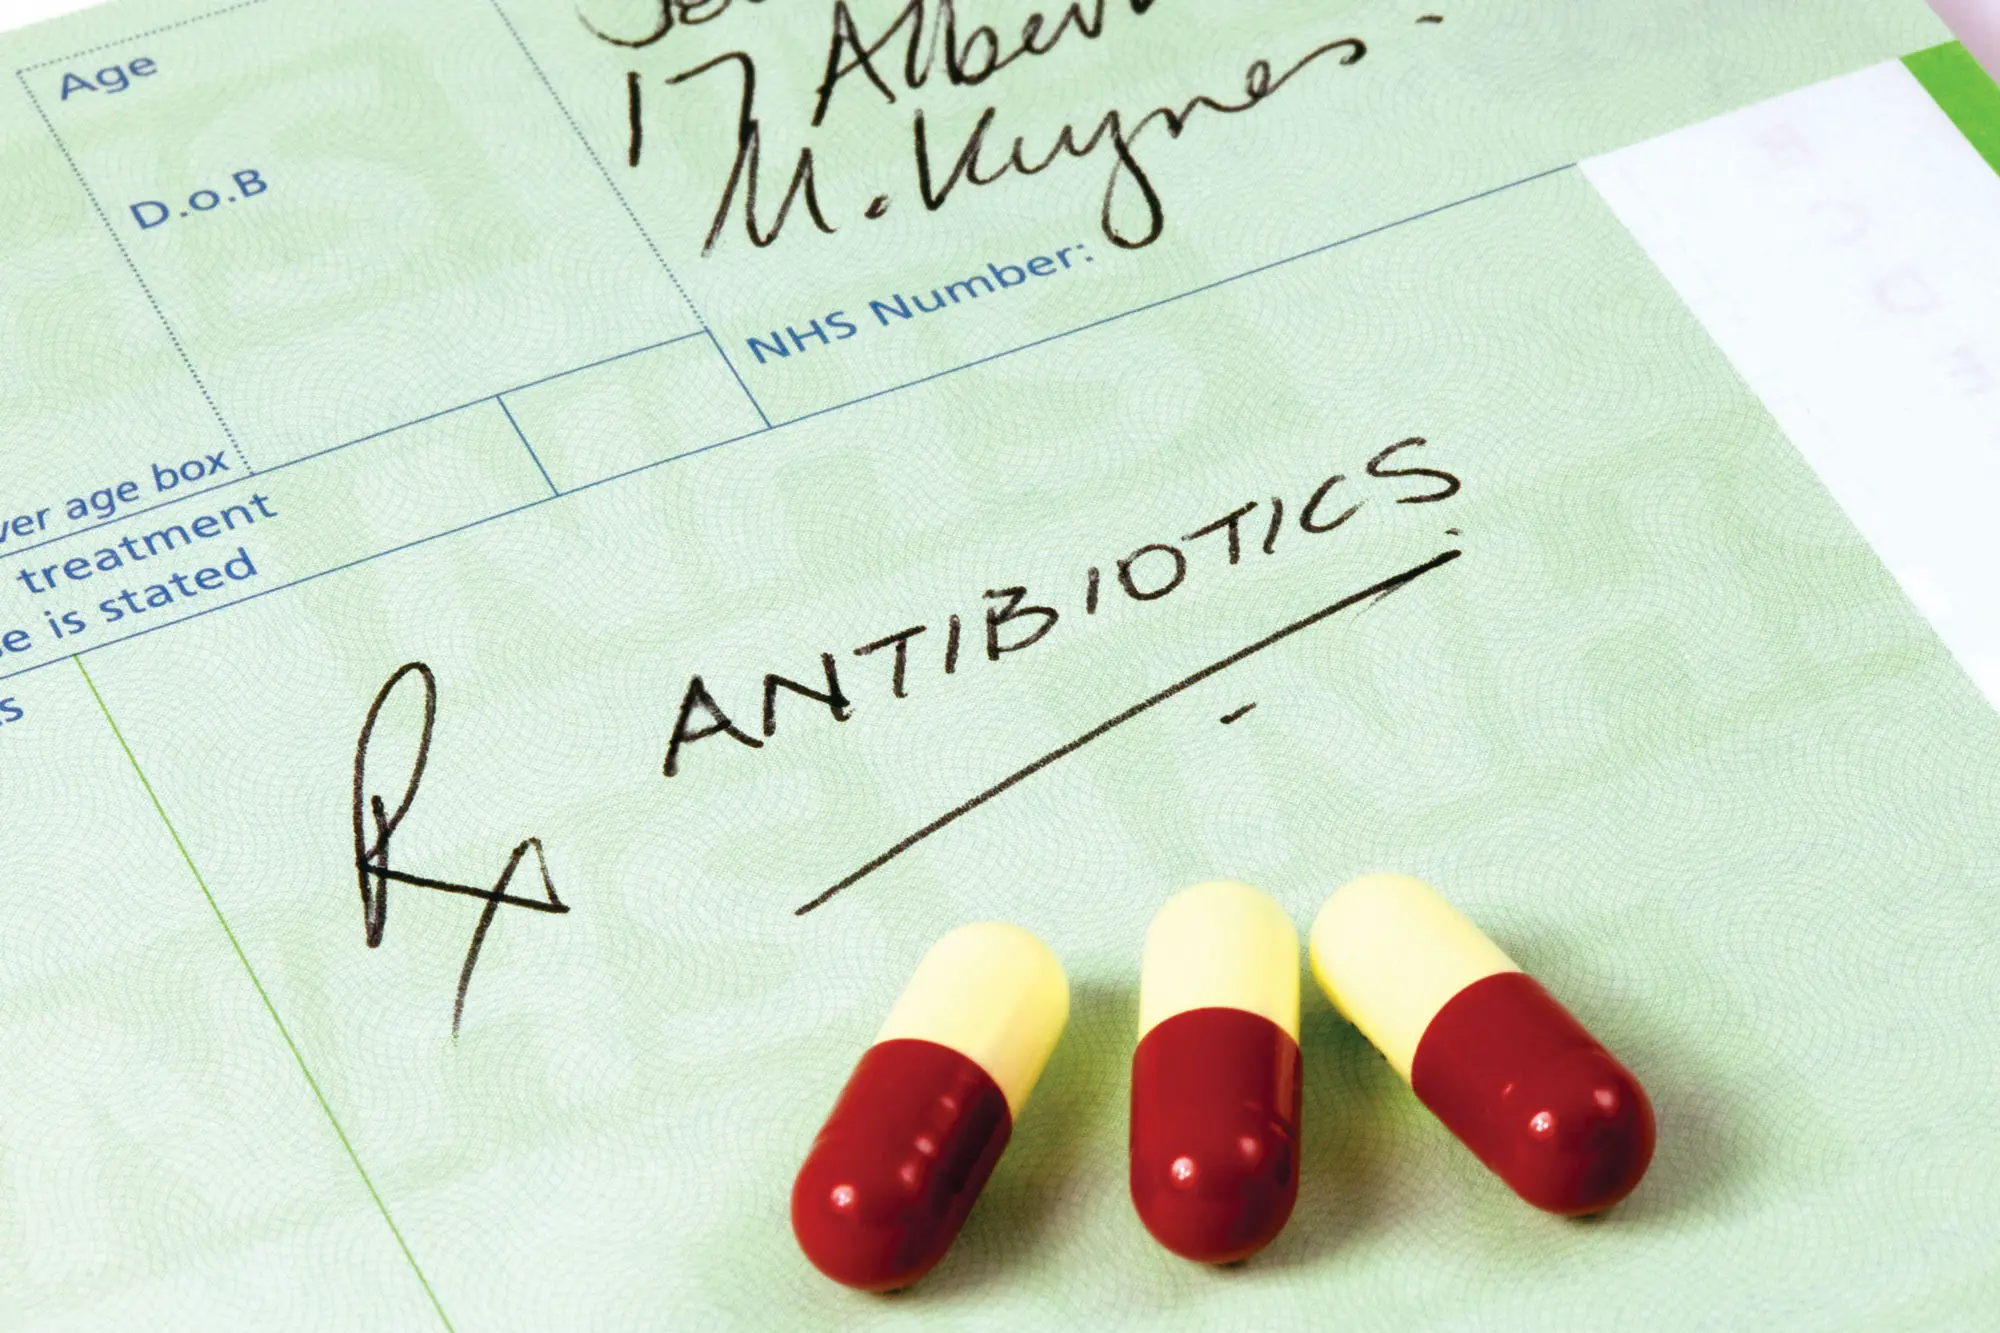 Do You Need Antibiotic Prescriptions? And Why Is It So Unsafe